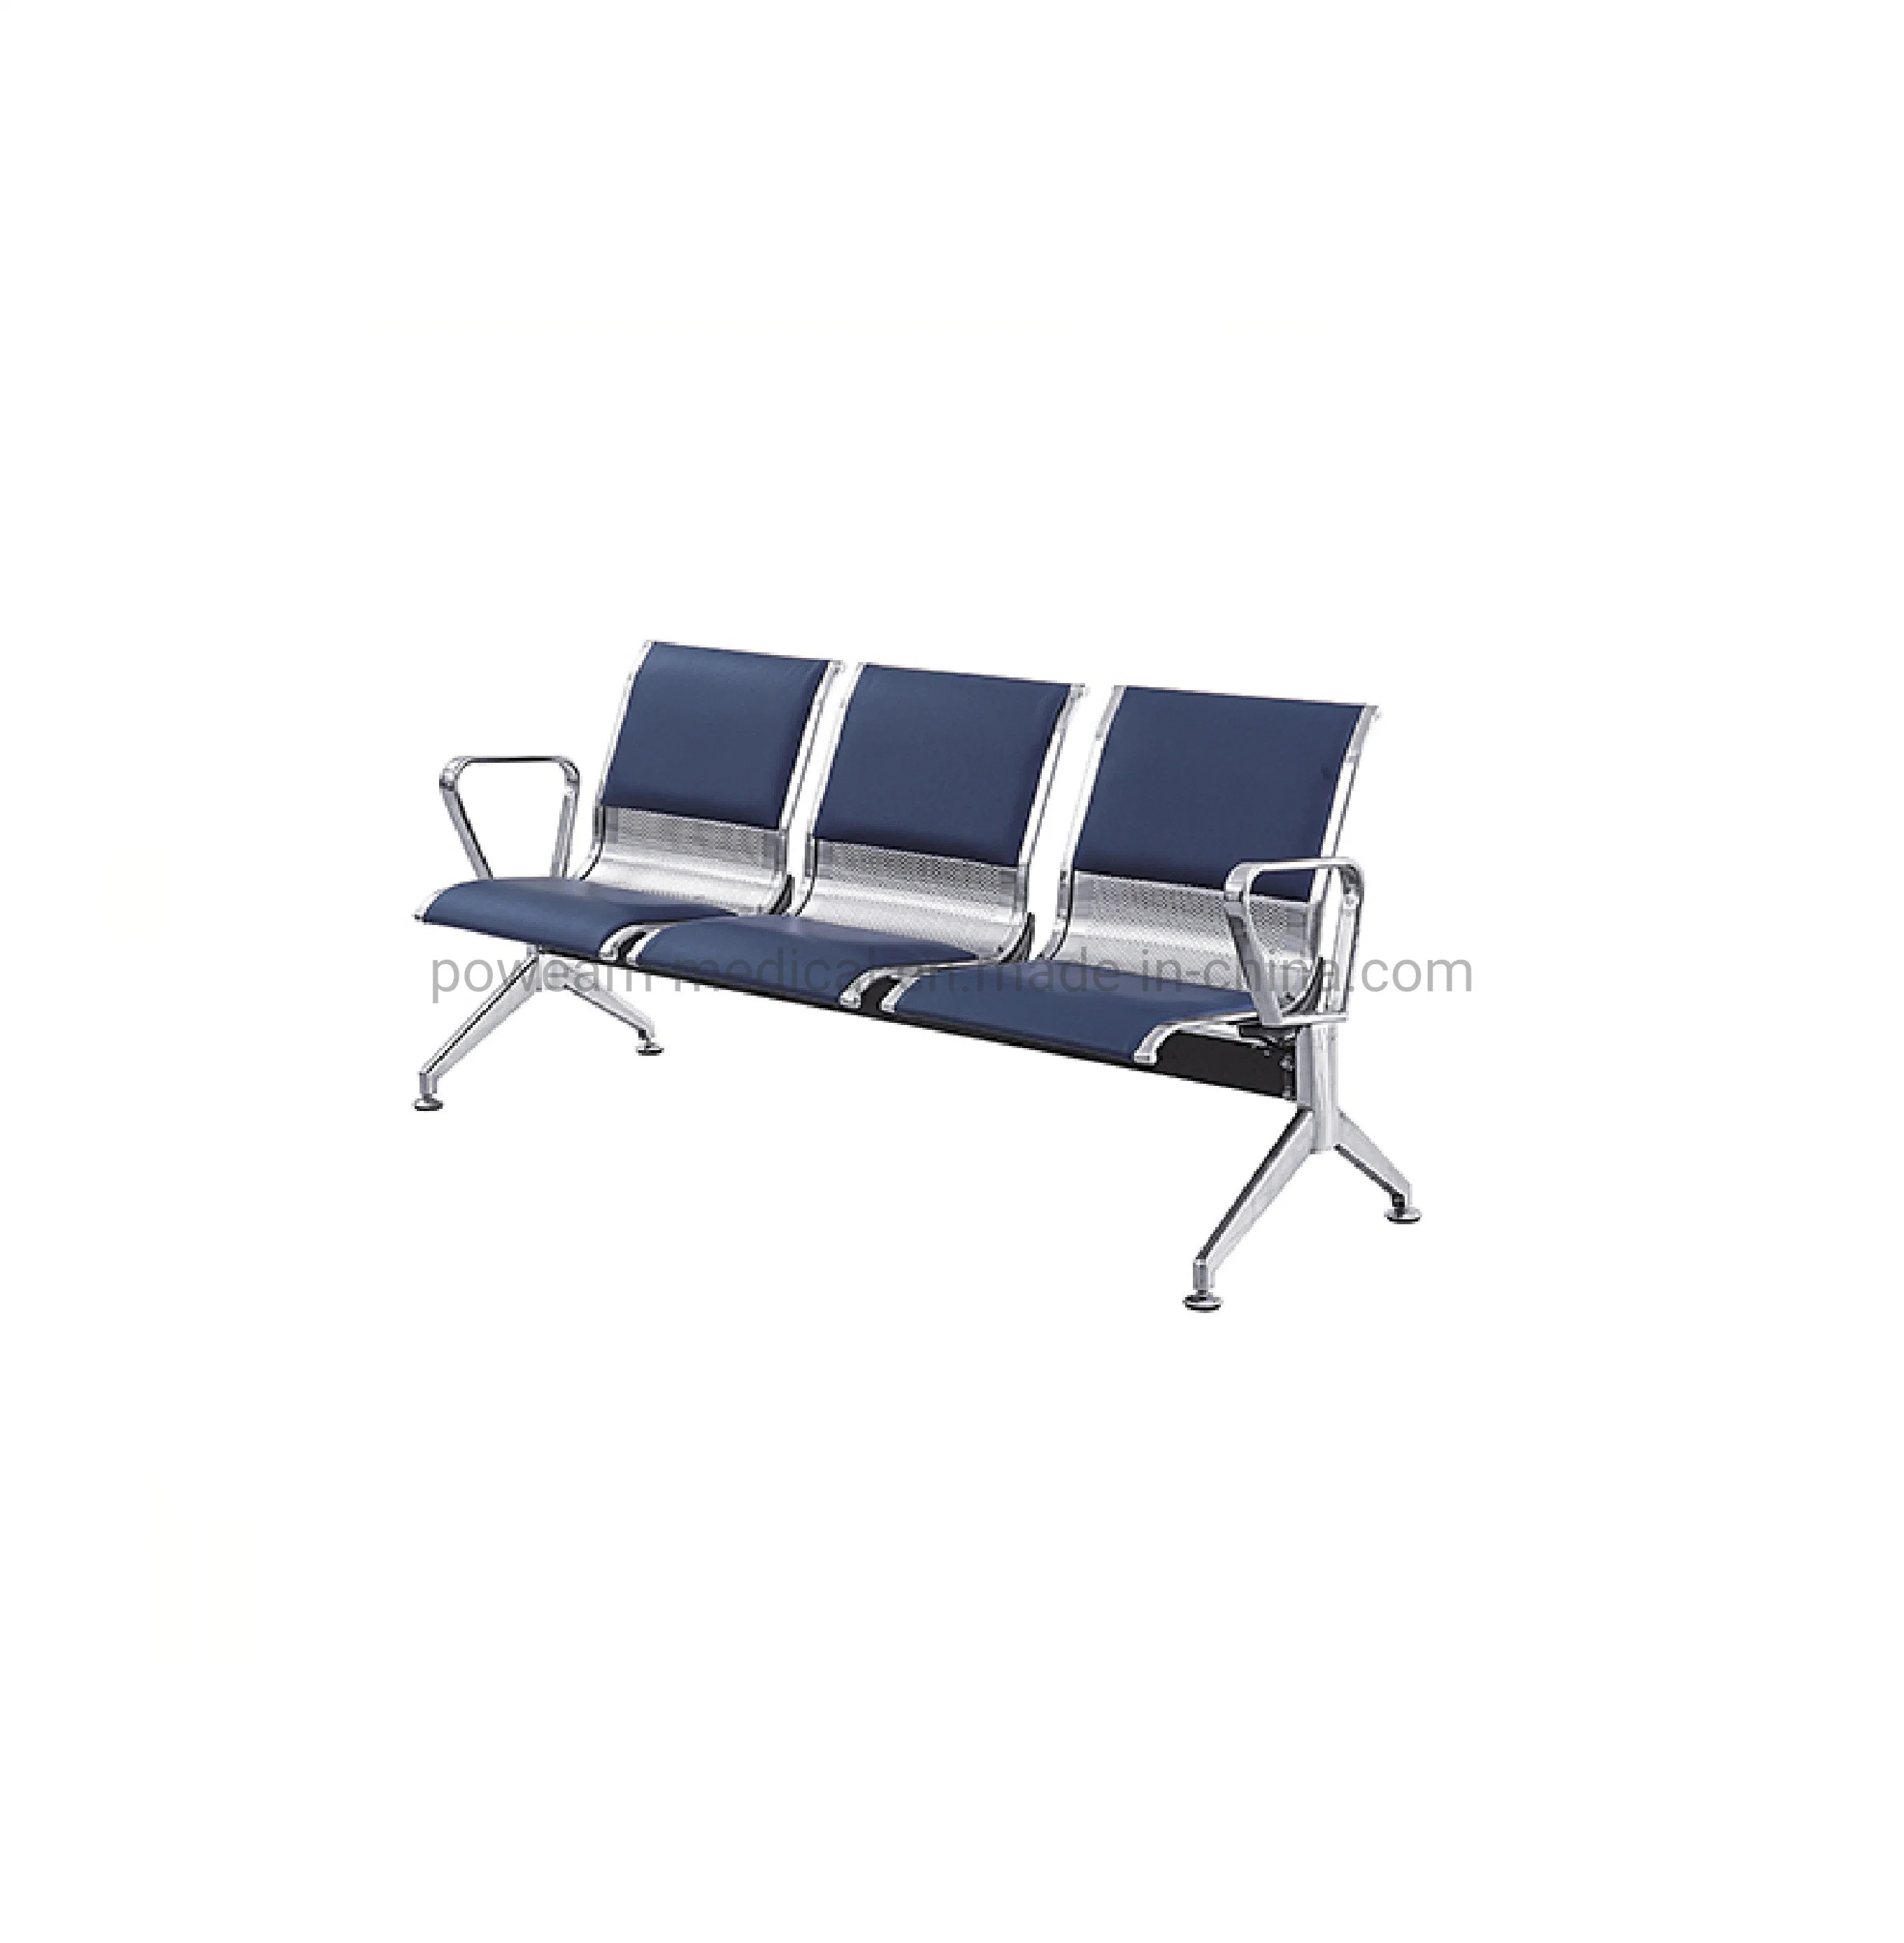 Airport Hospital Waiting Chair Bench Office Visitor Chair Metal Home Furniture